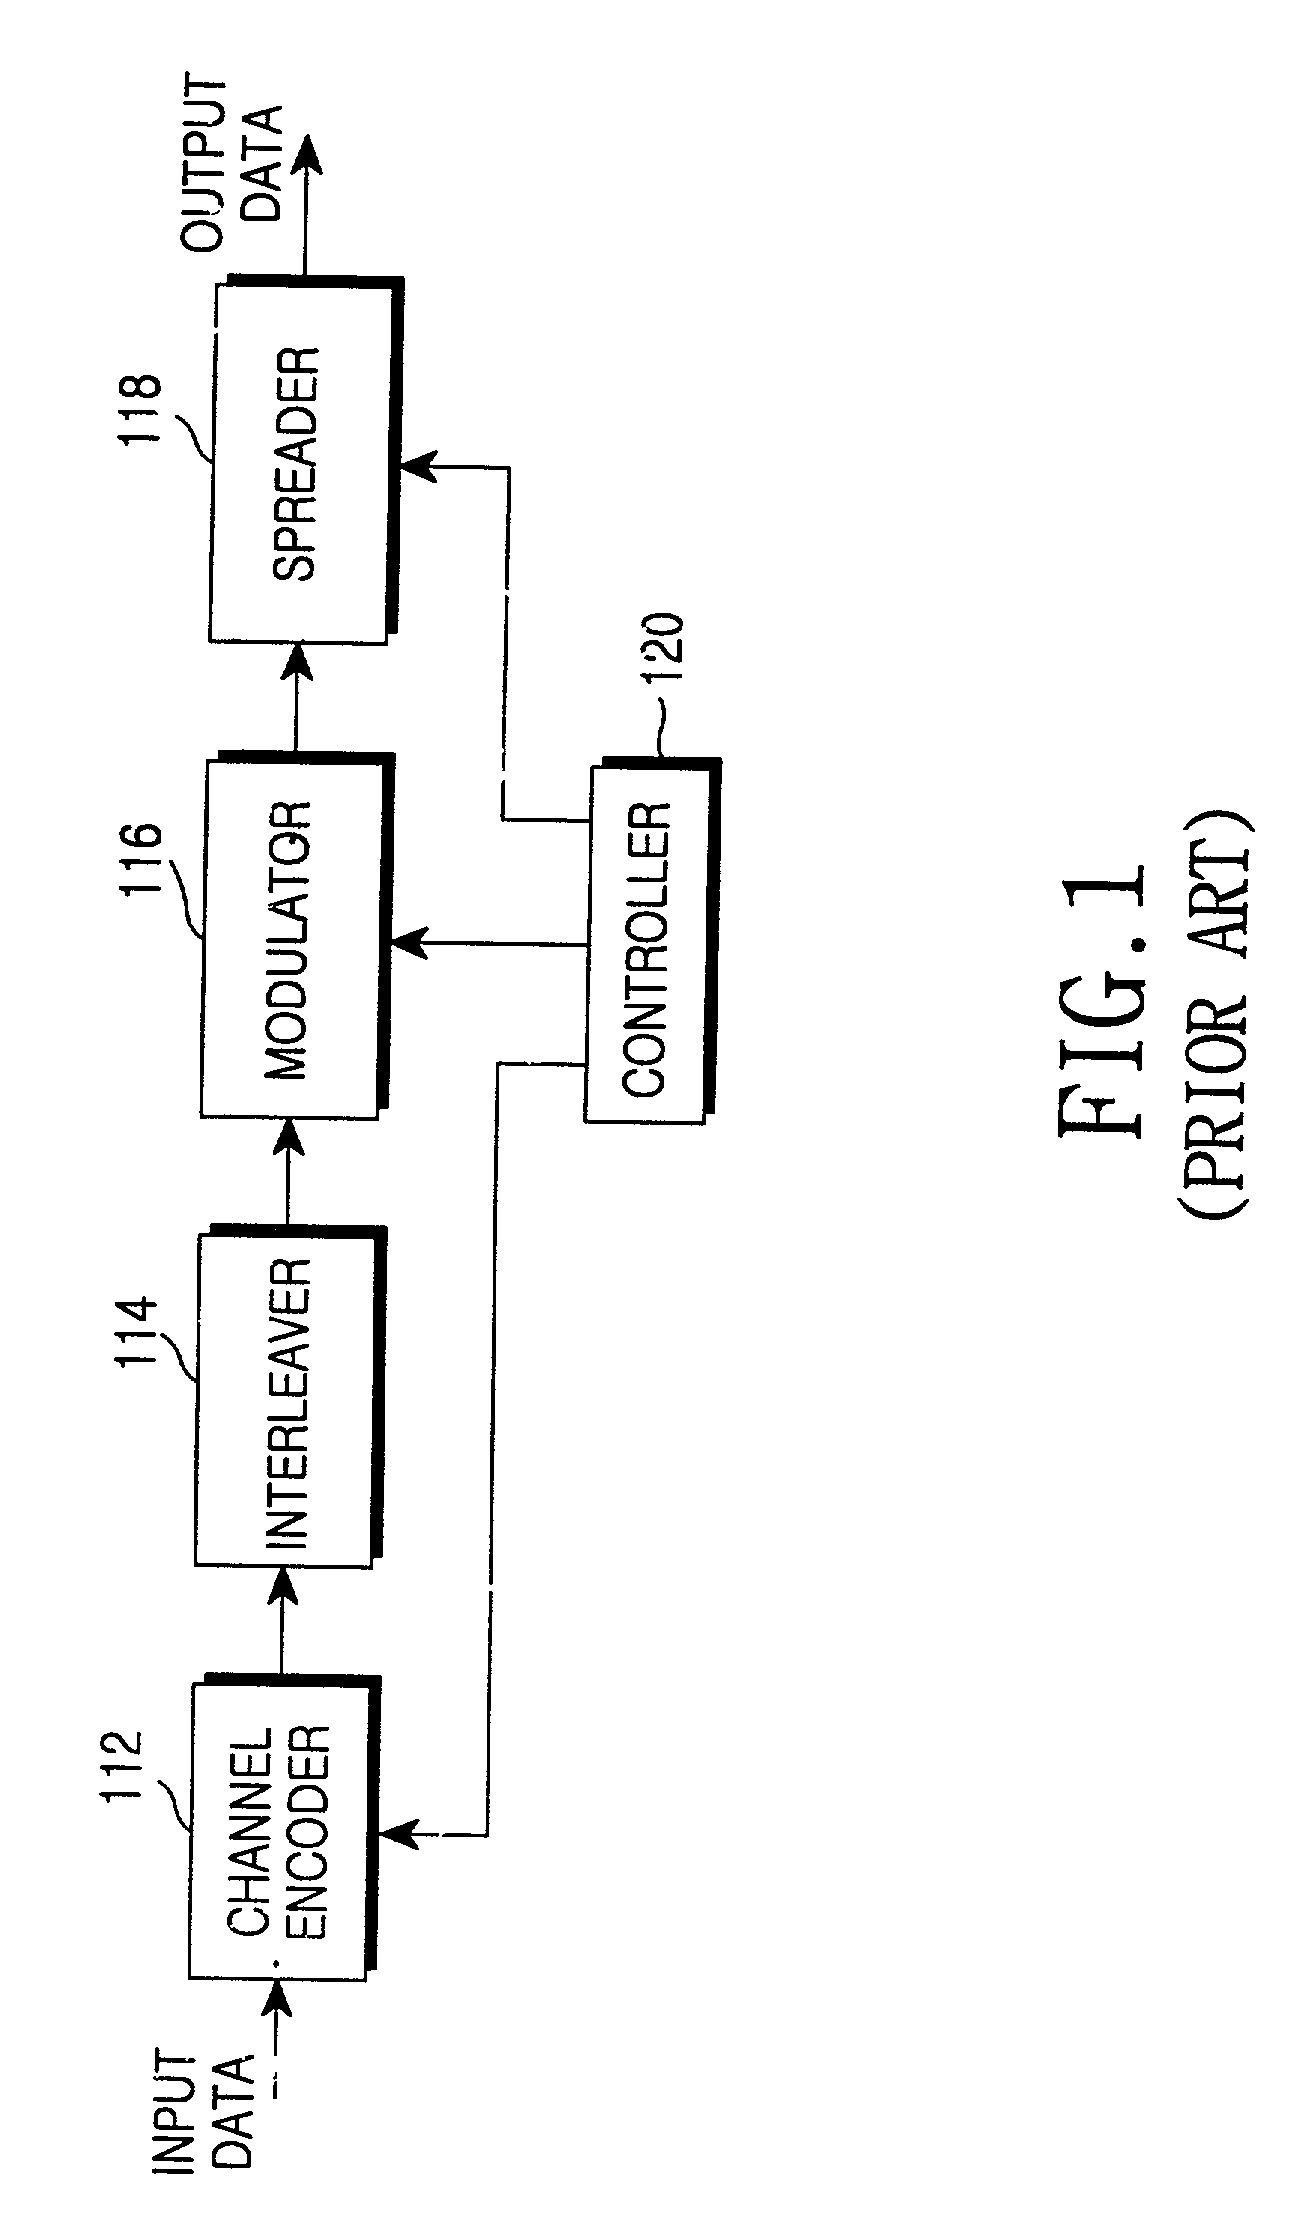 Apparatus and method for retransmitting high-speed data in a CDMA mobile communication system